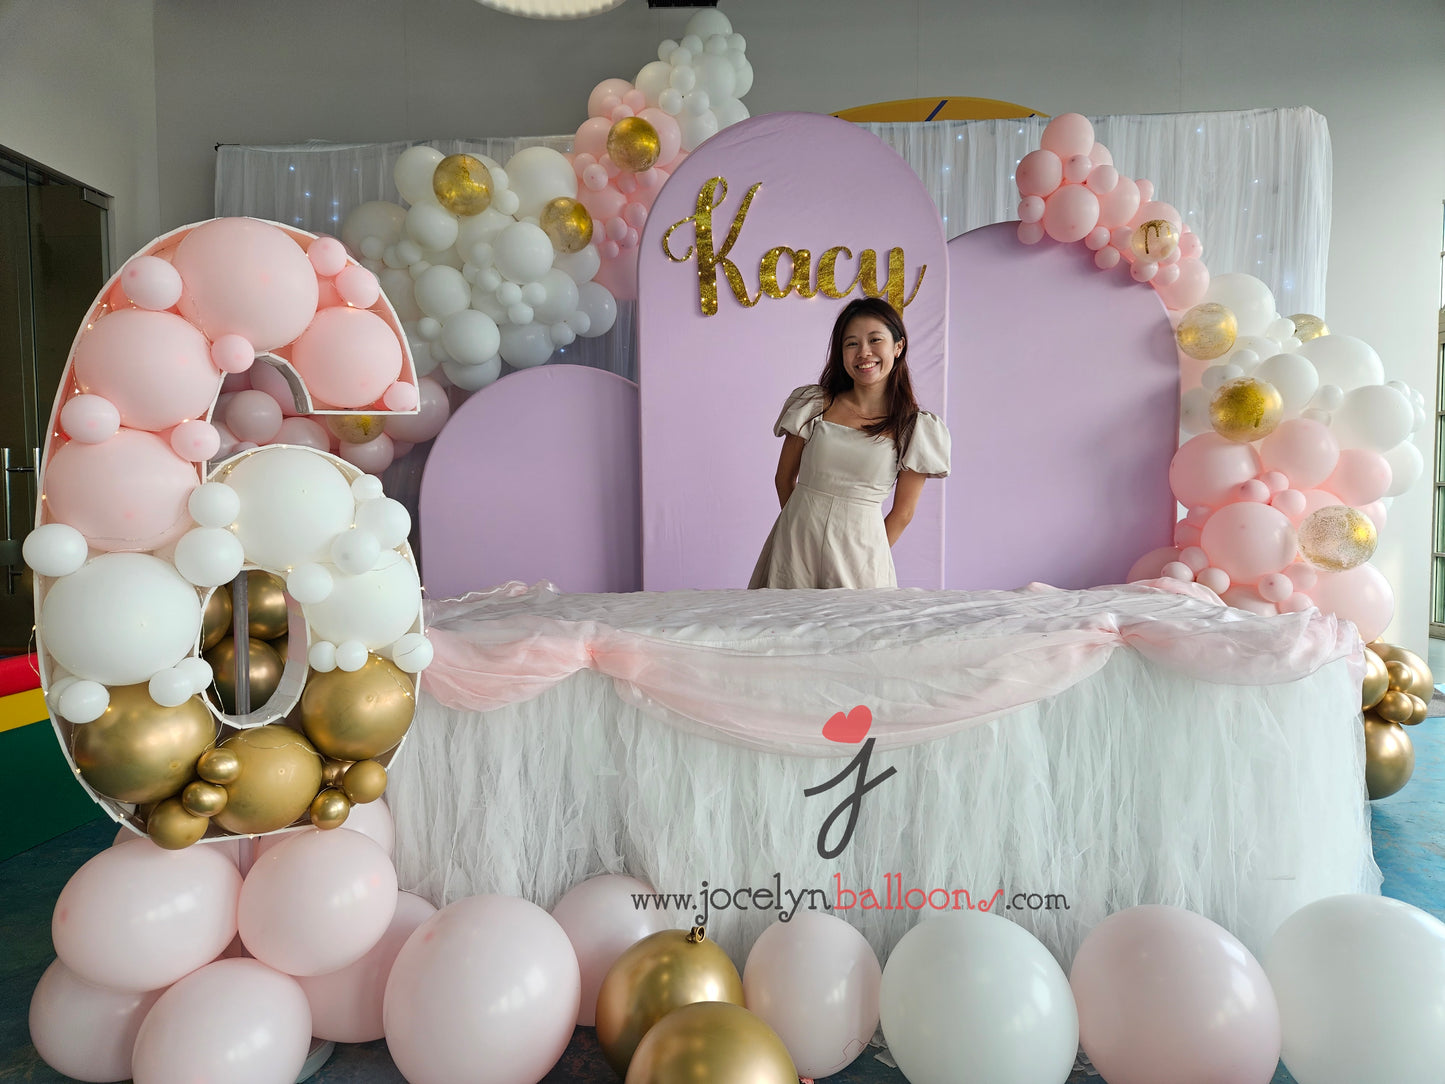 Grand Solid Foam Board & LED White Curtain Backdrop with Organic Balloon Garland